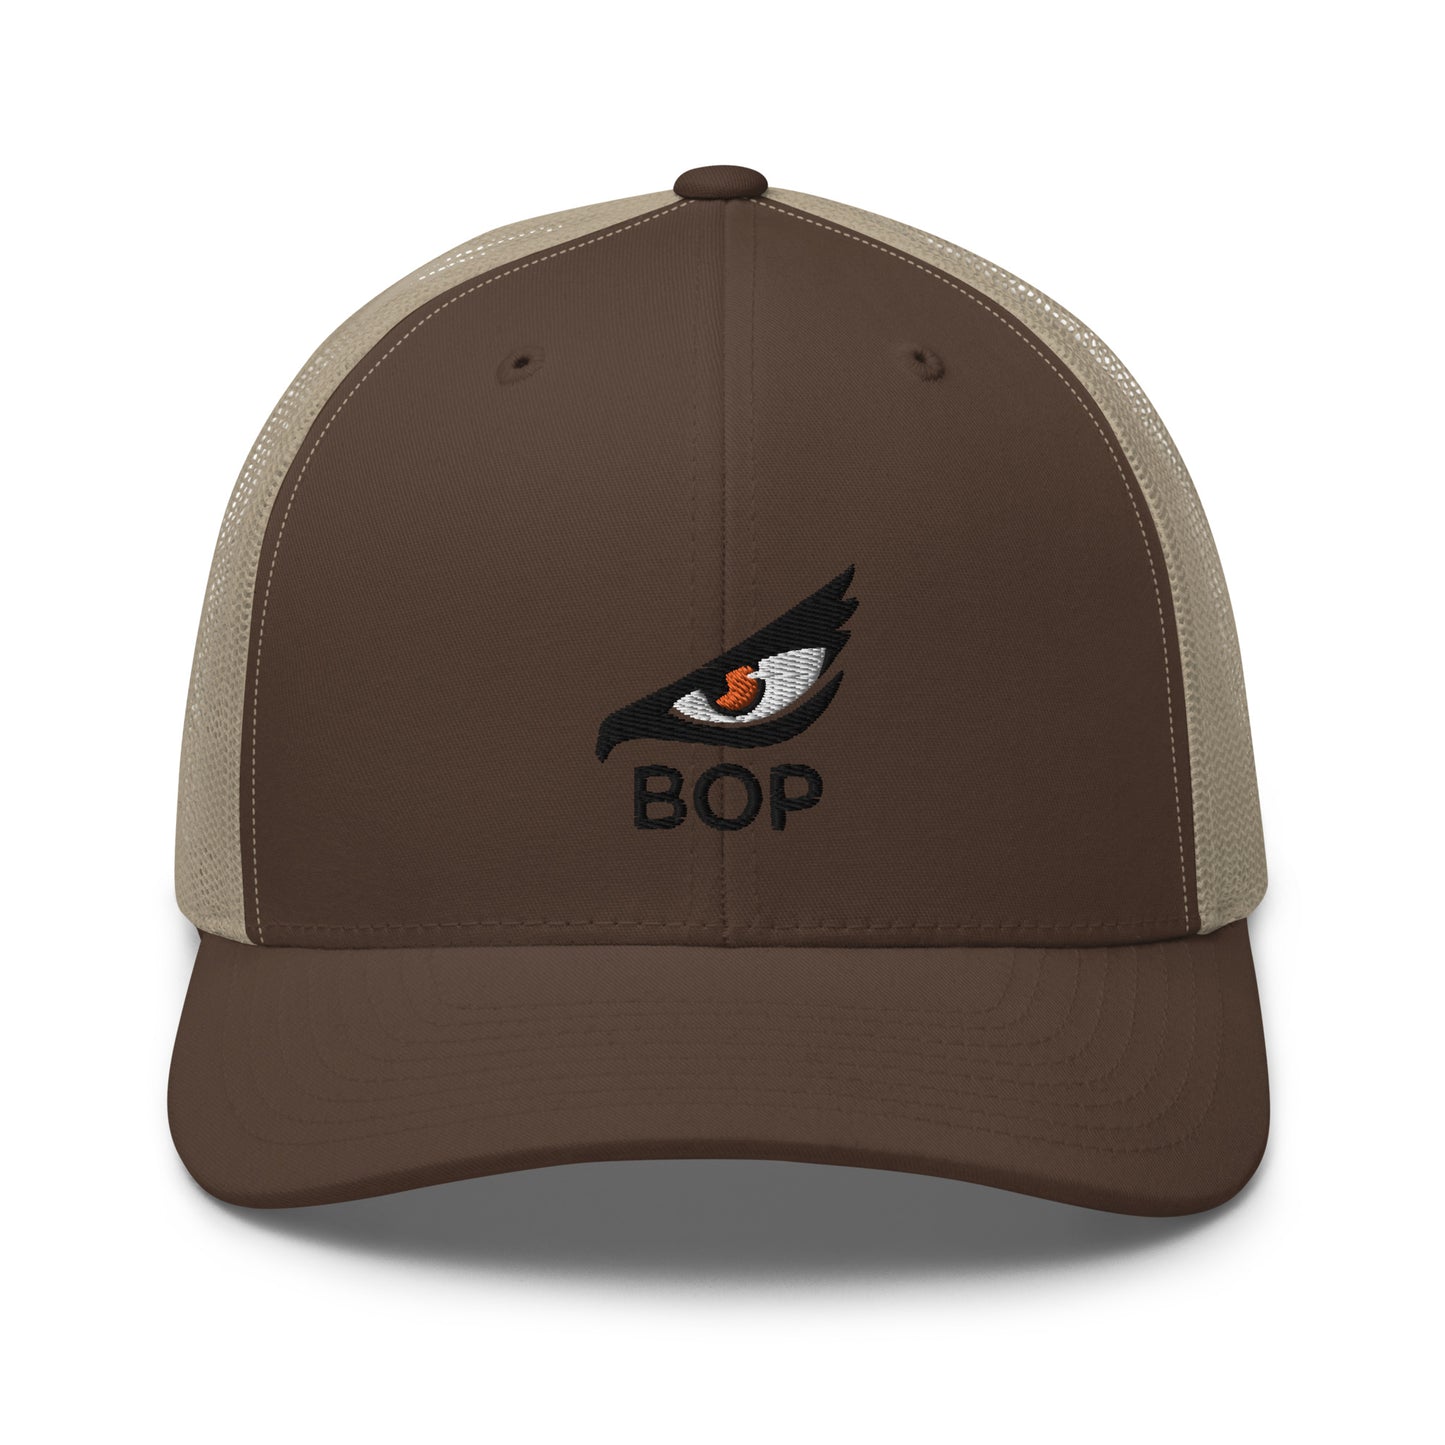 Brown Trucker Hat for Men with Mesh Back and Eagle Eye